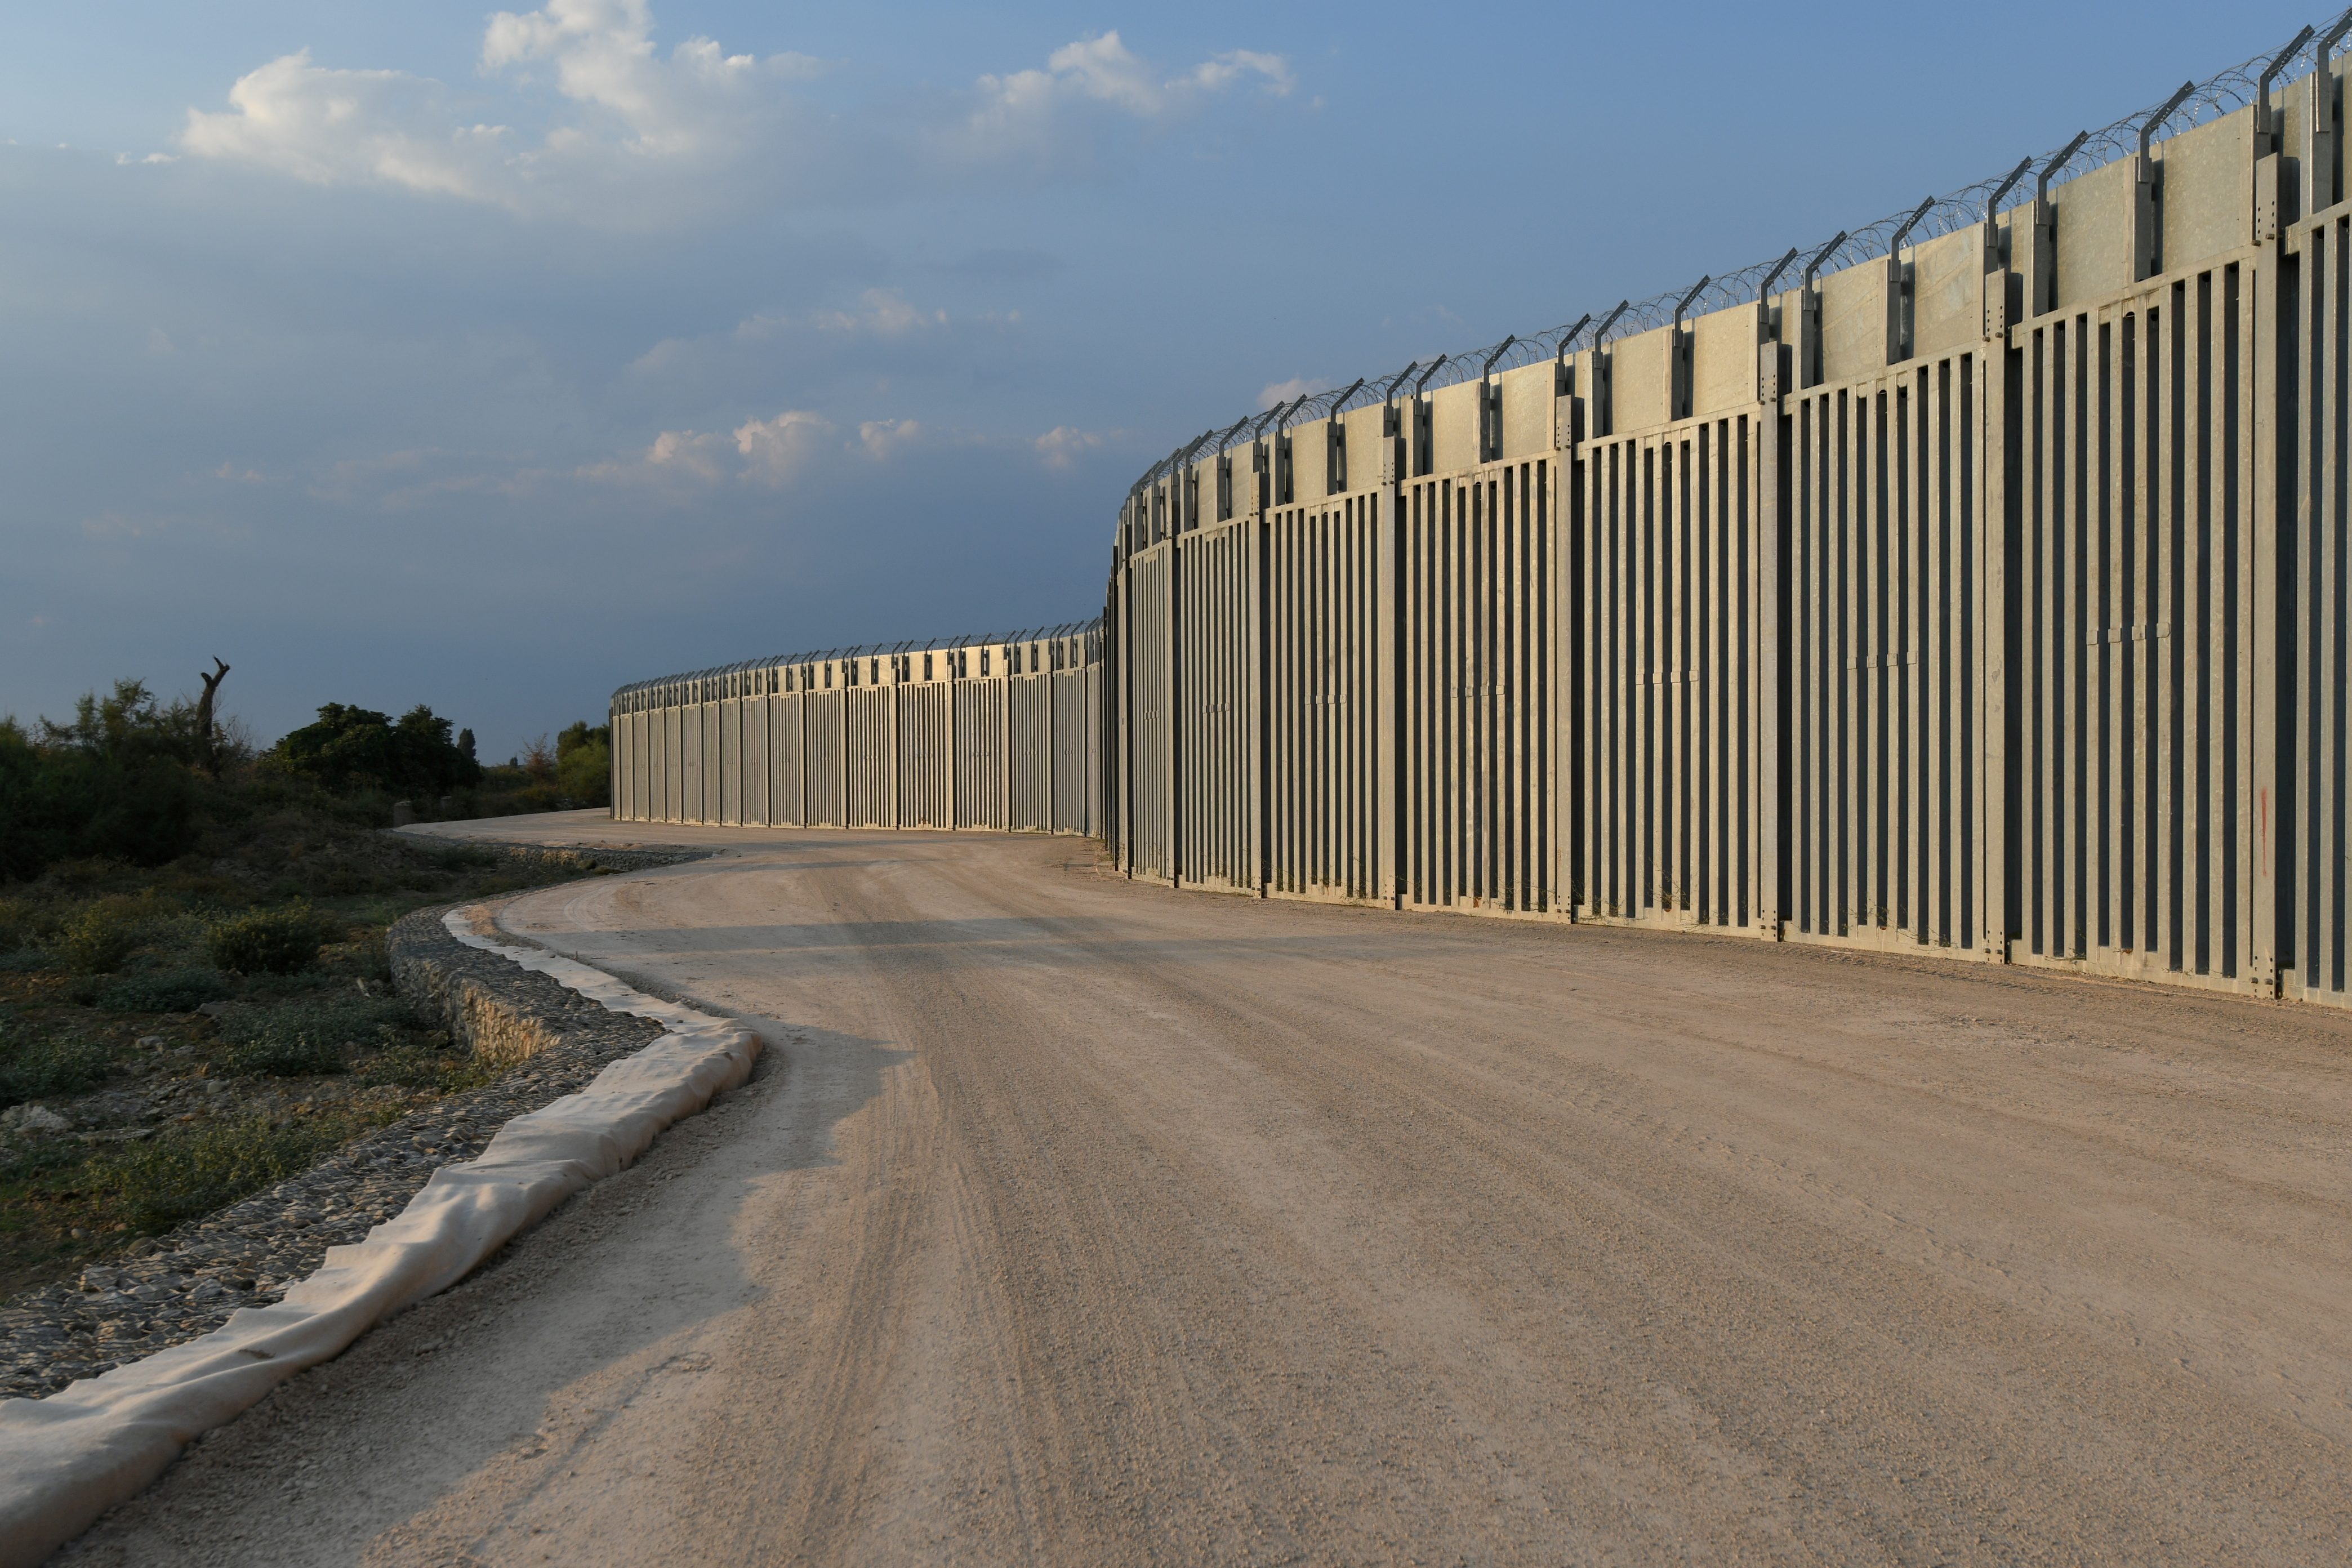 View of a border fence between Greece and Turkey, in Alexandroupolis